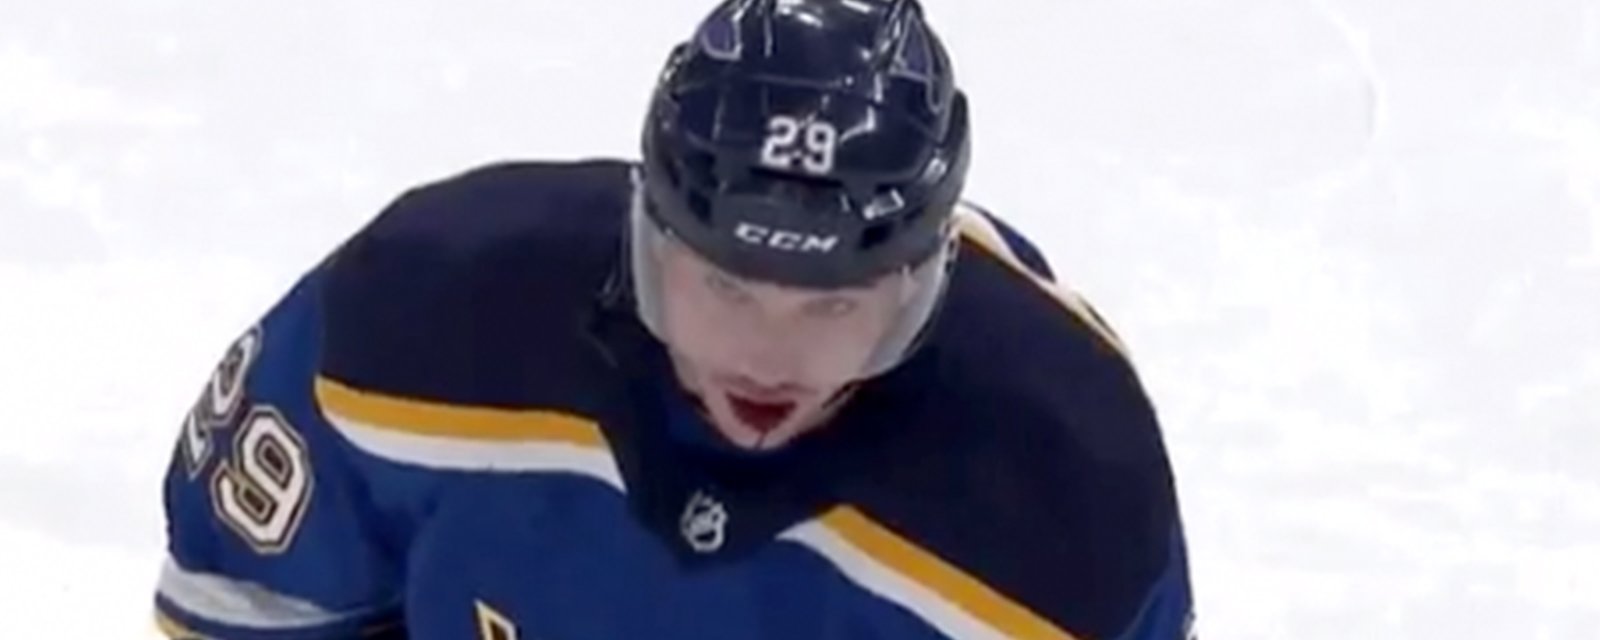 Dunn takes a puck in the face, spits blood out on the ice